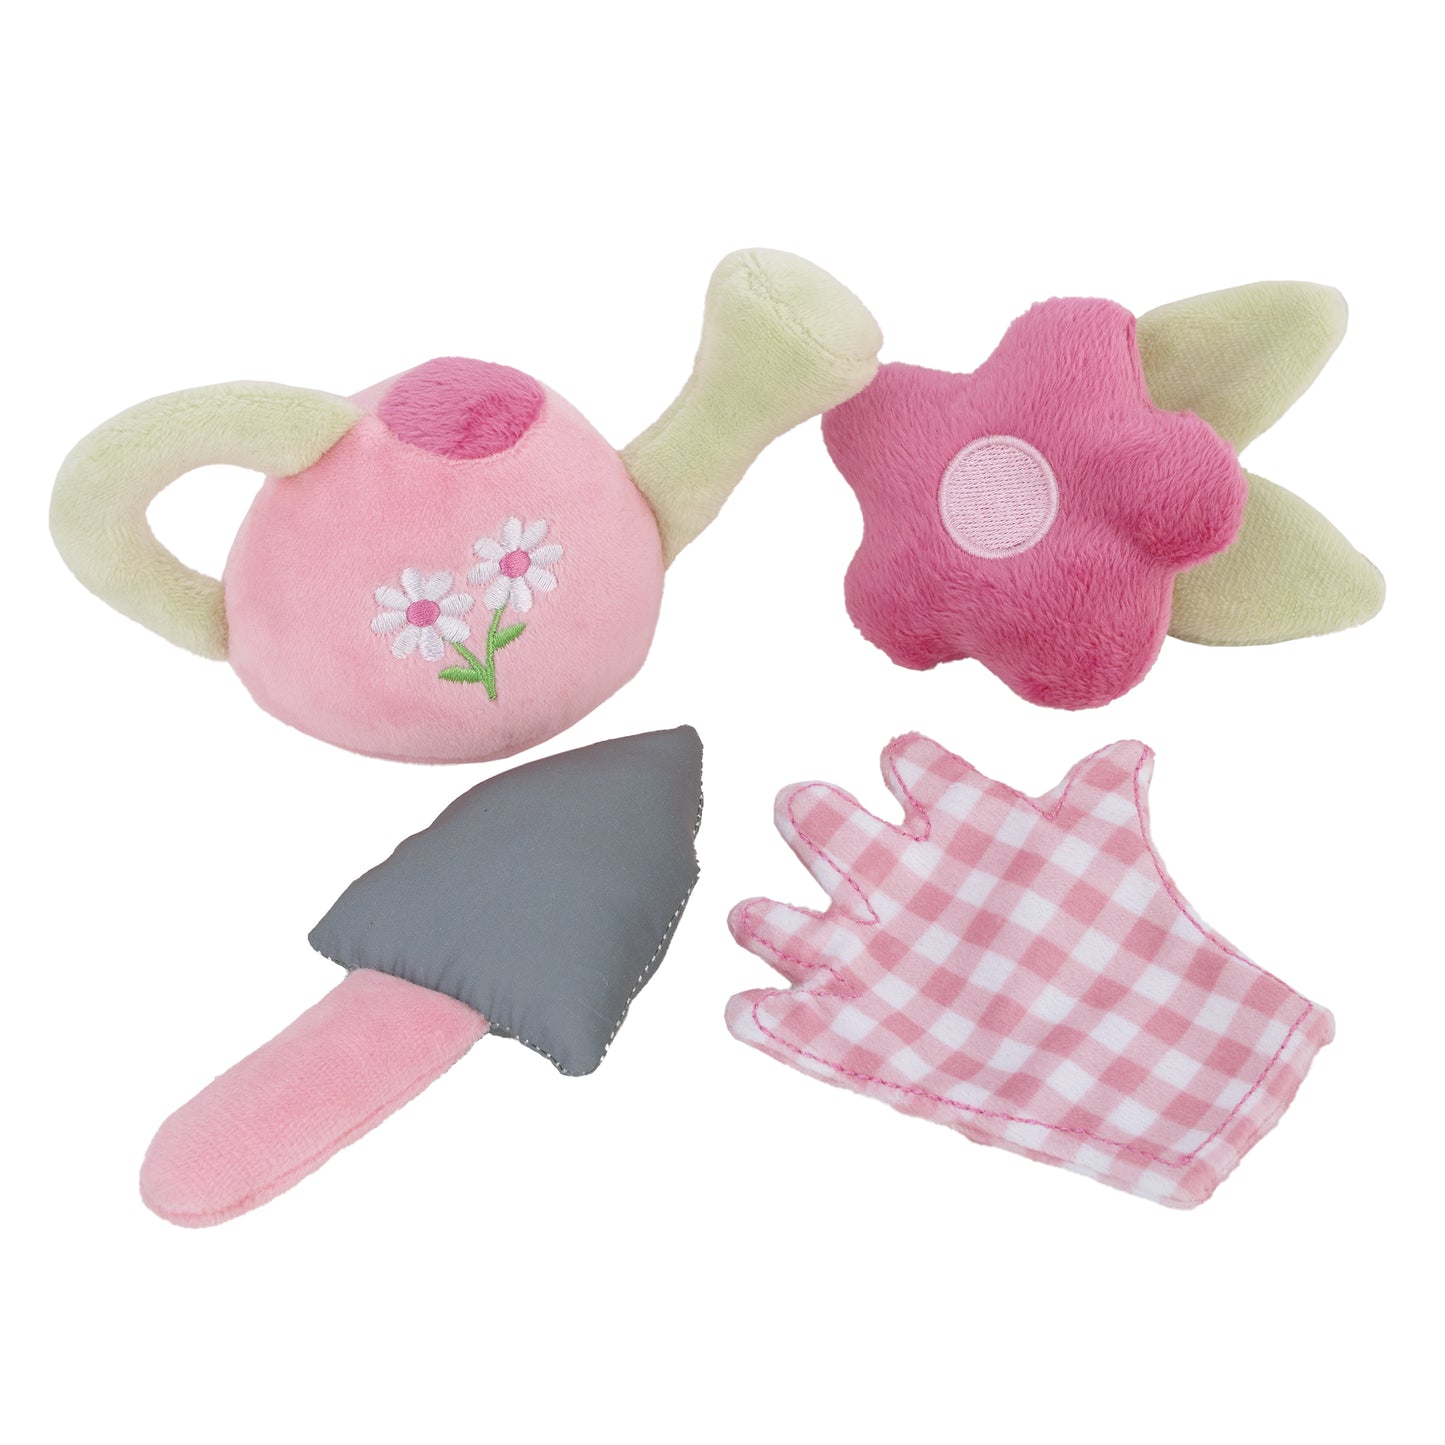 Little Love by NoJo My First Garden Tools Green Plush 5 Piece Toy Set - Tote, Glove, Watering Can, Hand Trowel, and Flower